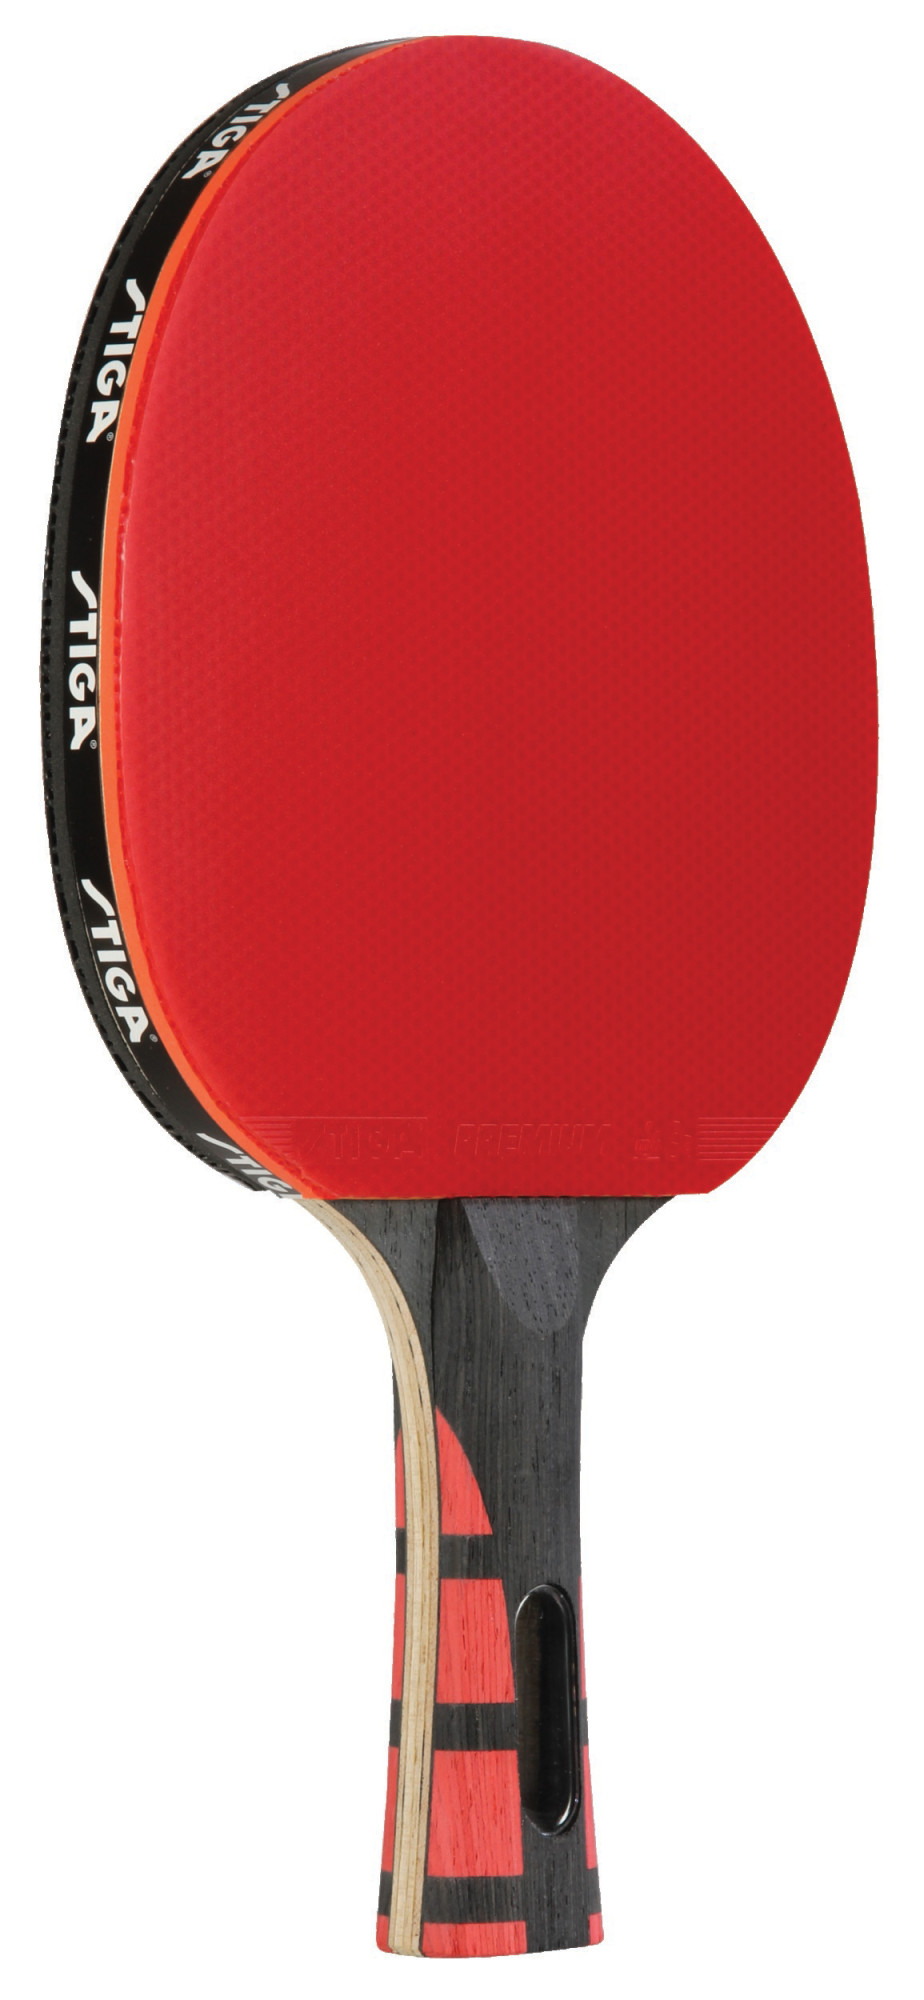 STIGA Evolution Performance-Level Table Tennis Racket Made with Approved Rubber for Tournament Play - image 1 of 15